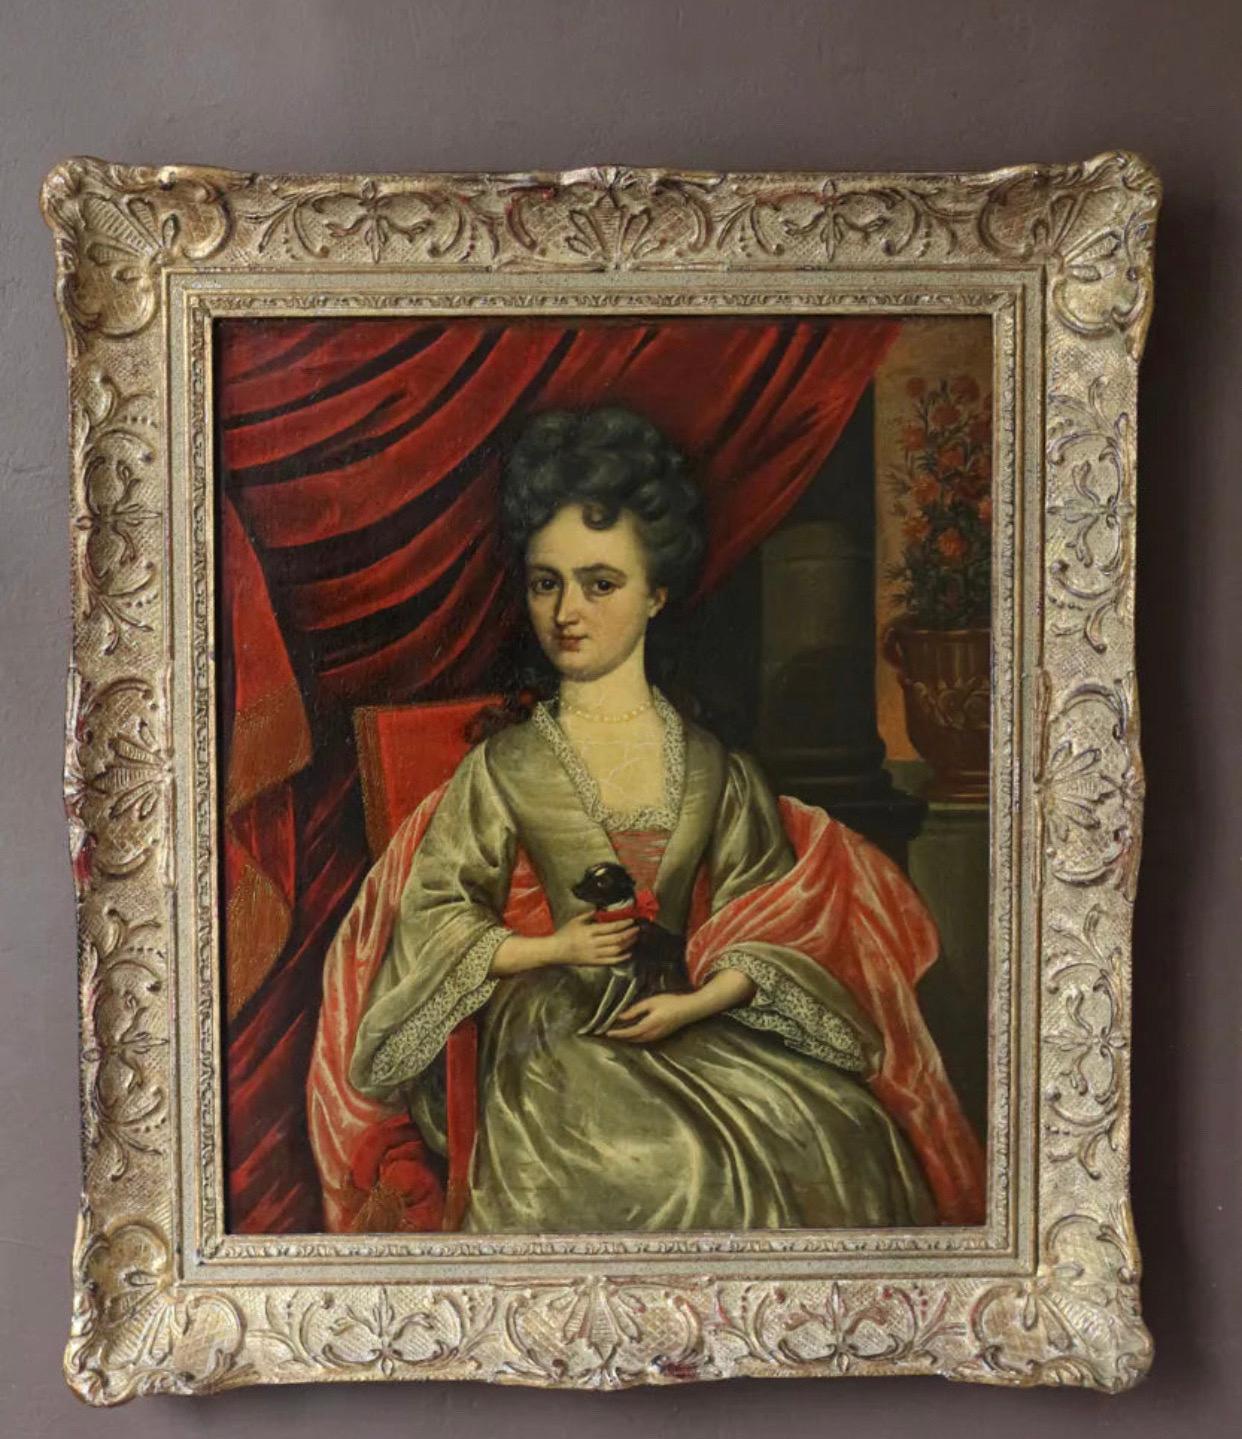 Incredible early 1800s Parisian realism/ naive portrait of Madame de Graffigny. Measures 65 x 53.
Françoise de Graffigny, author of the famous novel ‘letters from a Peruvian woman’ published in 1747, is one of the most important women in 18th